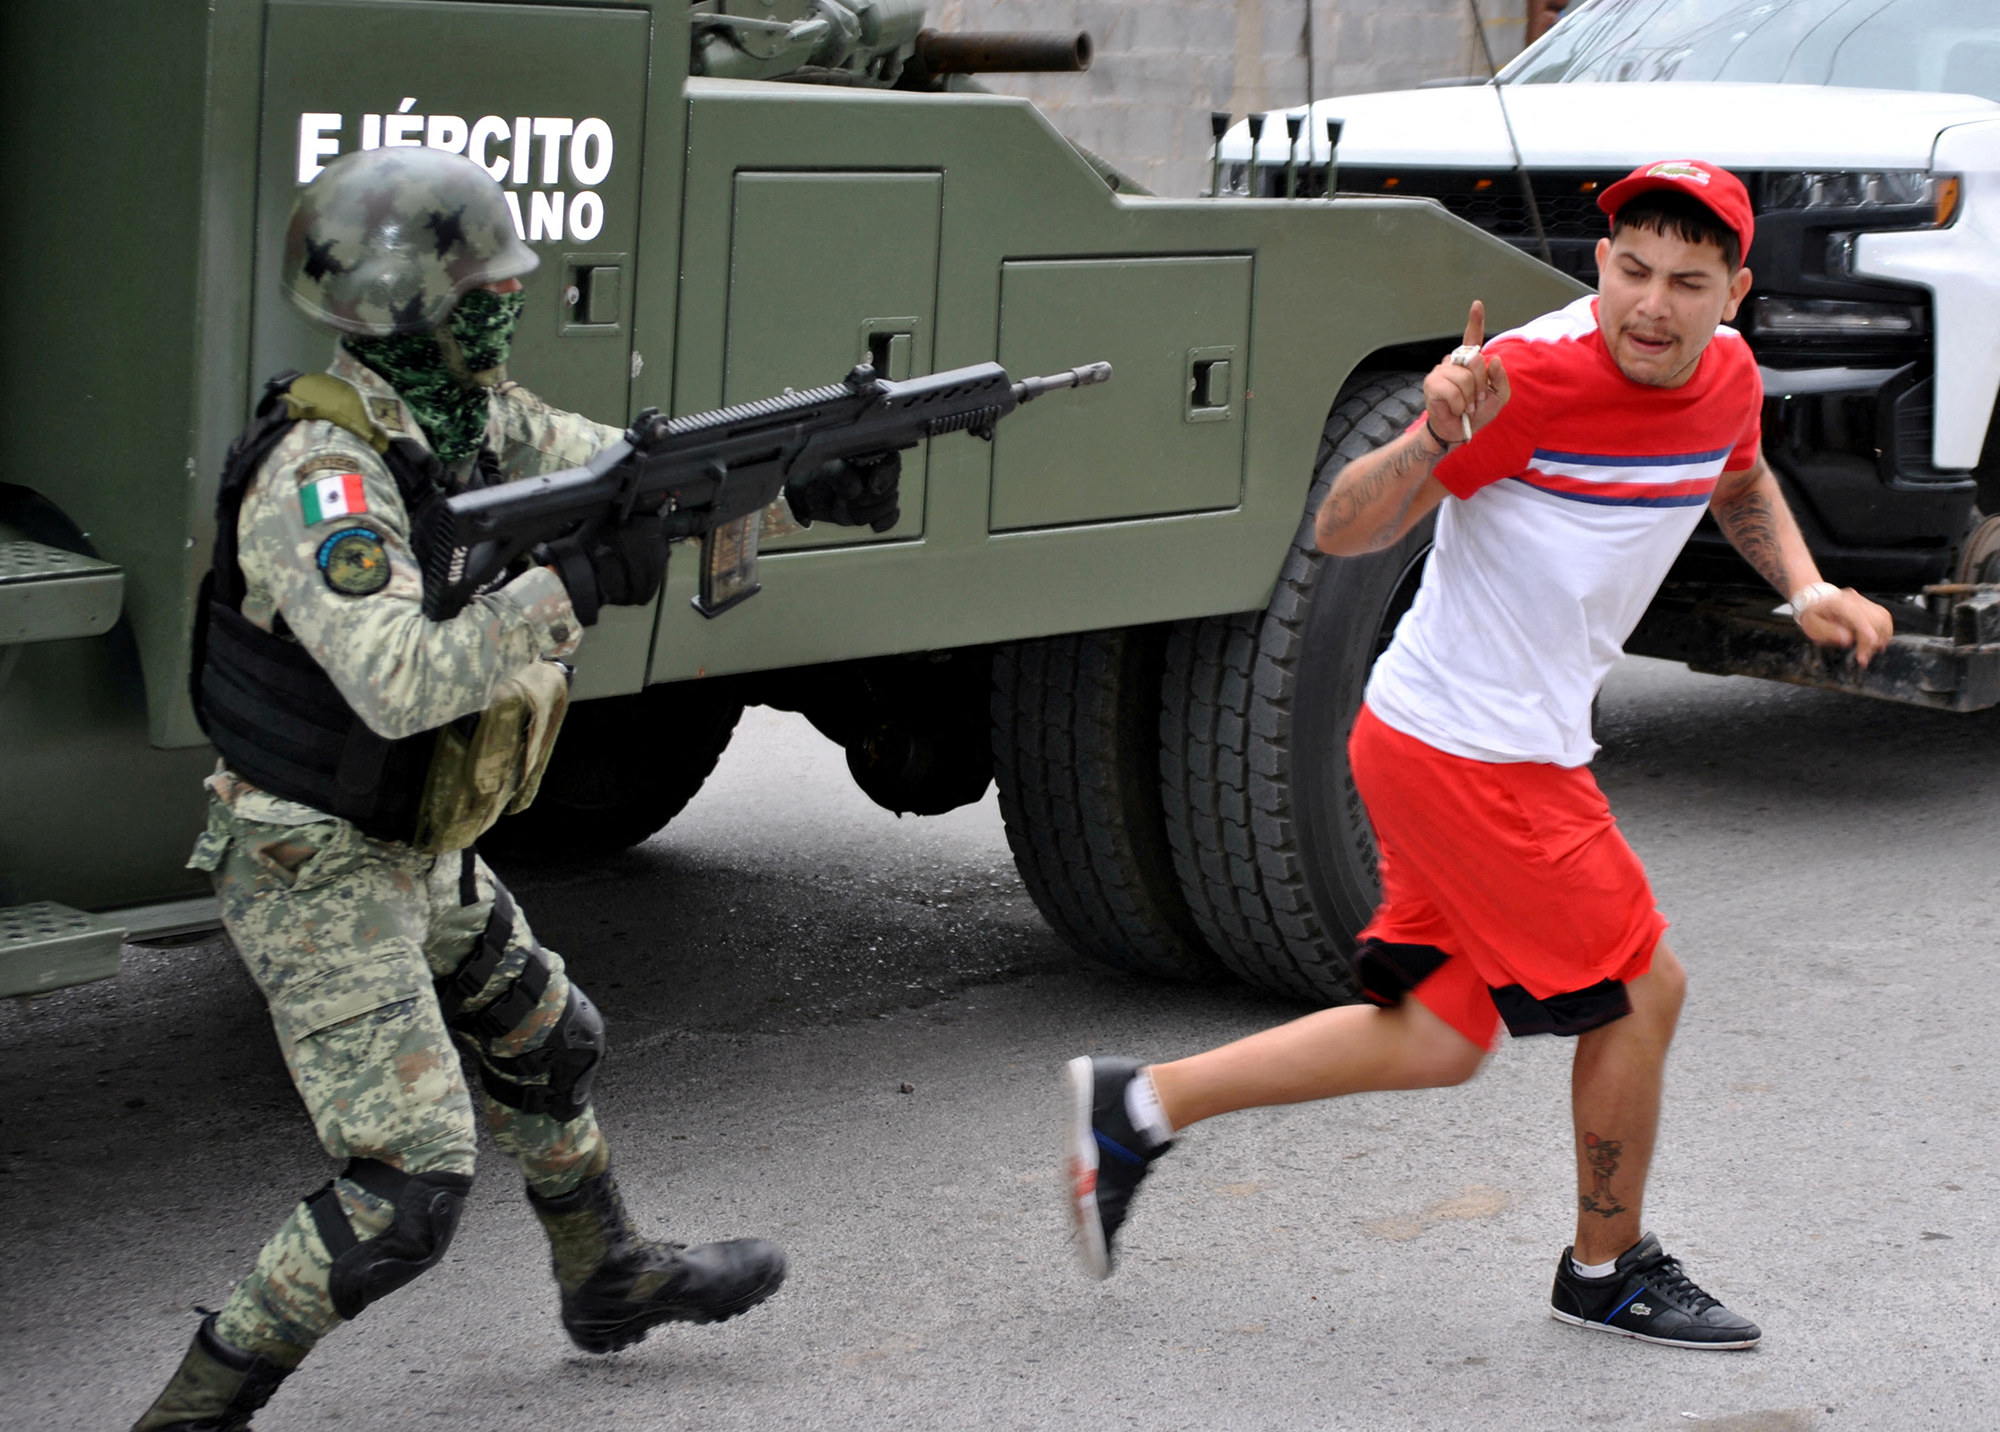 A person wearing red shorts, t-shirt and a baseball cap holds up a finger and runs away from a man holding an automatic gun and is dressed in military garb with boots, camouflage outerwear and helmet in front of a military truck